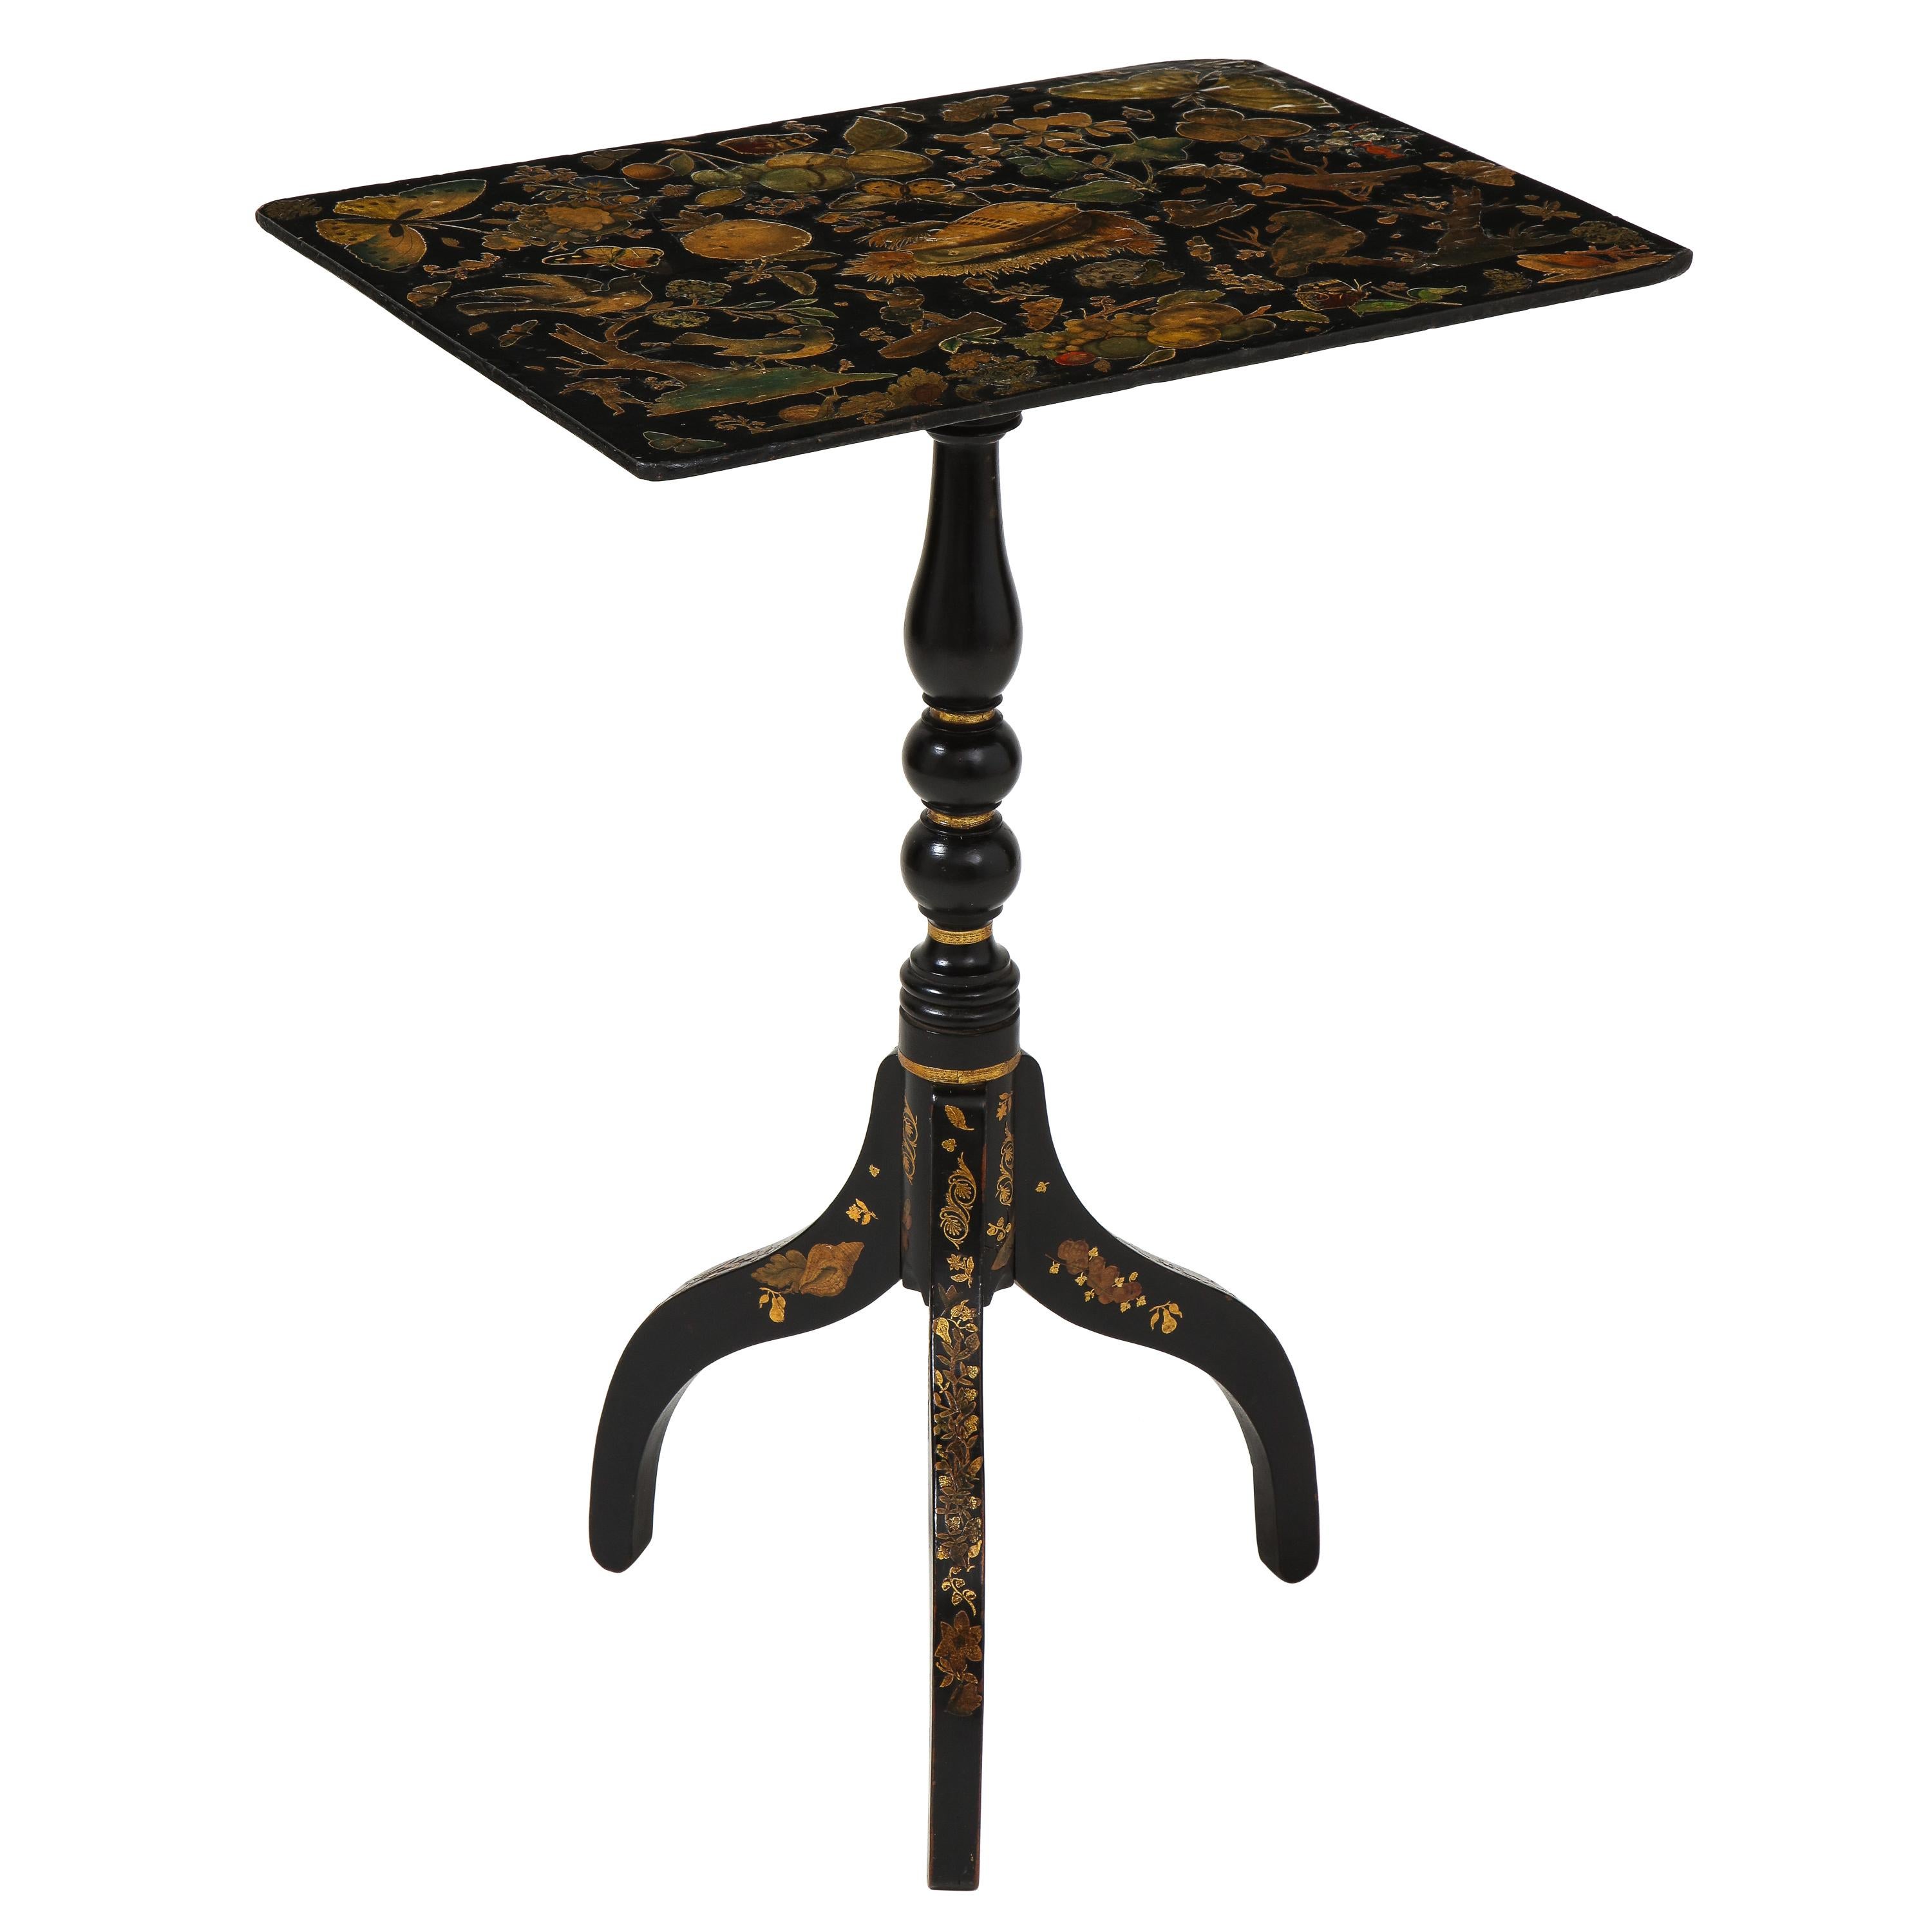 19th Century English Black Japanned and Shell Decoupaged Occasional Table